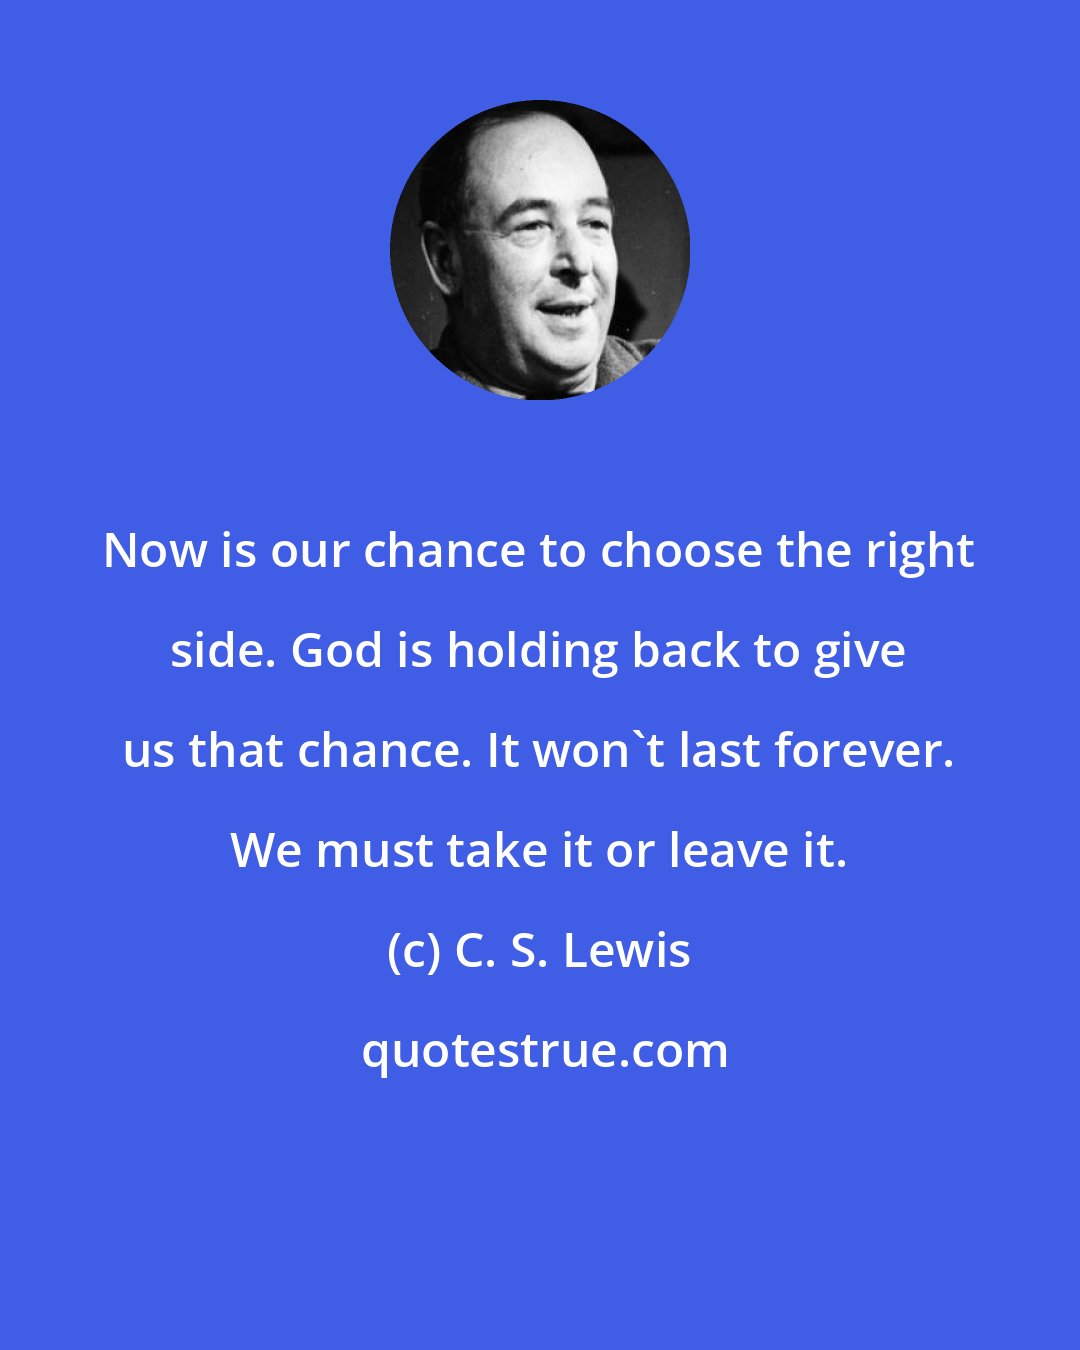 C. S. Lewis: Now is our chance to choose the right side. God is holding back to give us that chance. It won't last forever. We must take it or leave it.